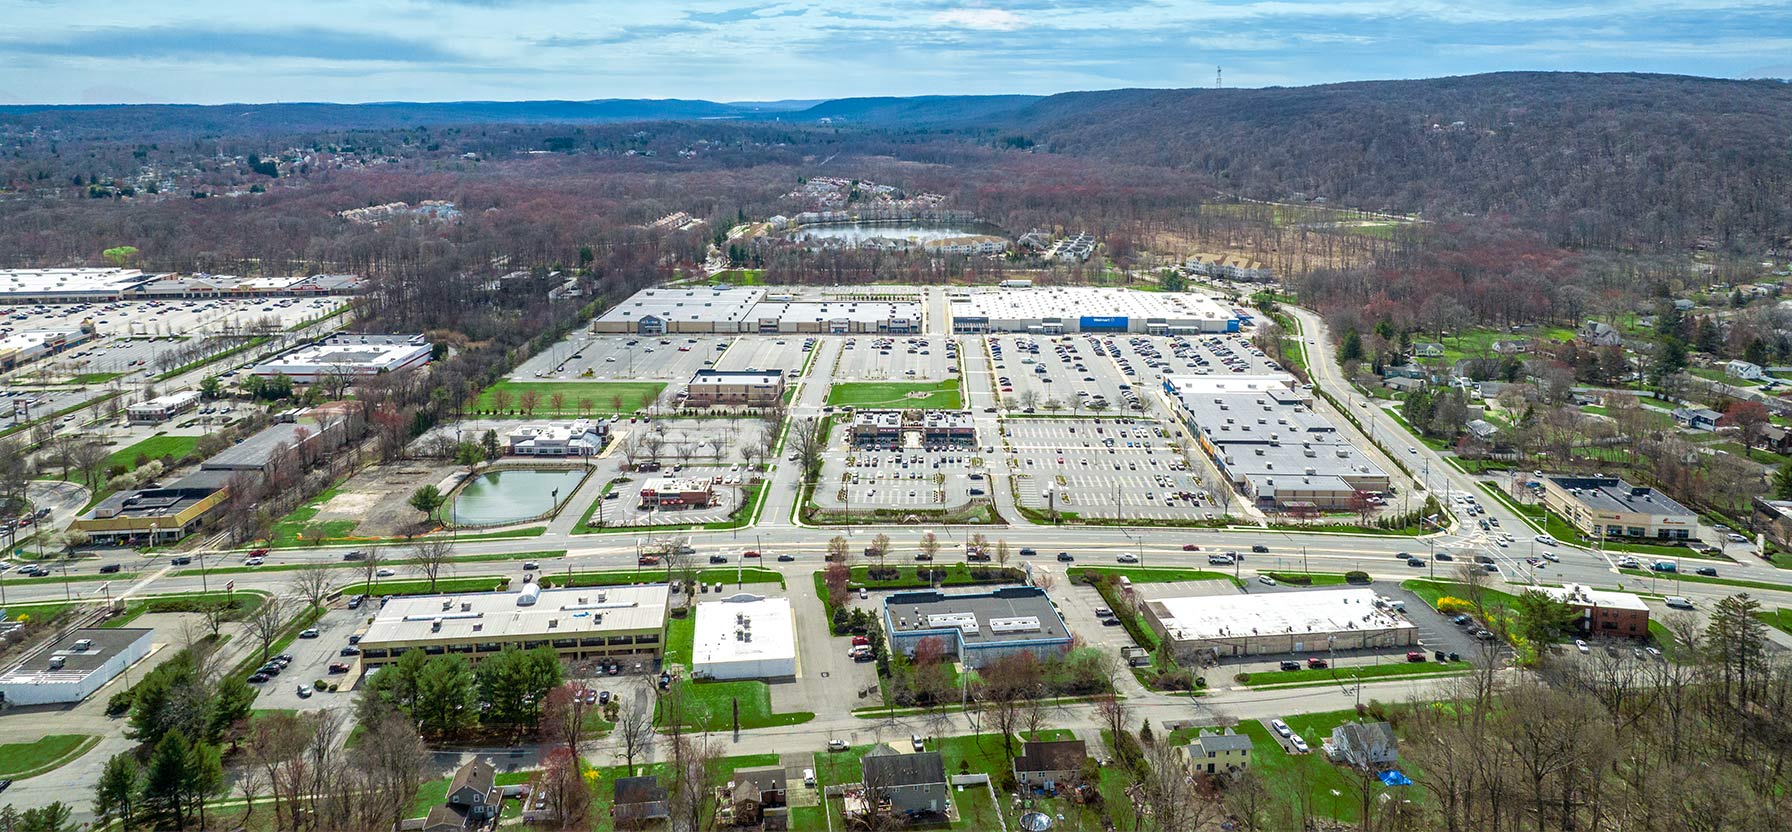 Aerial view of Ledgewood Commons shopping center and its adjacent parking lot, captured from a high vantage point.